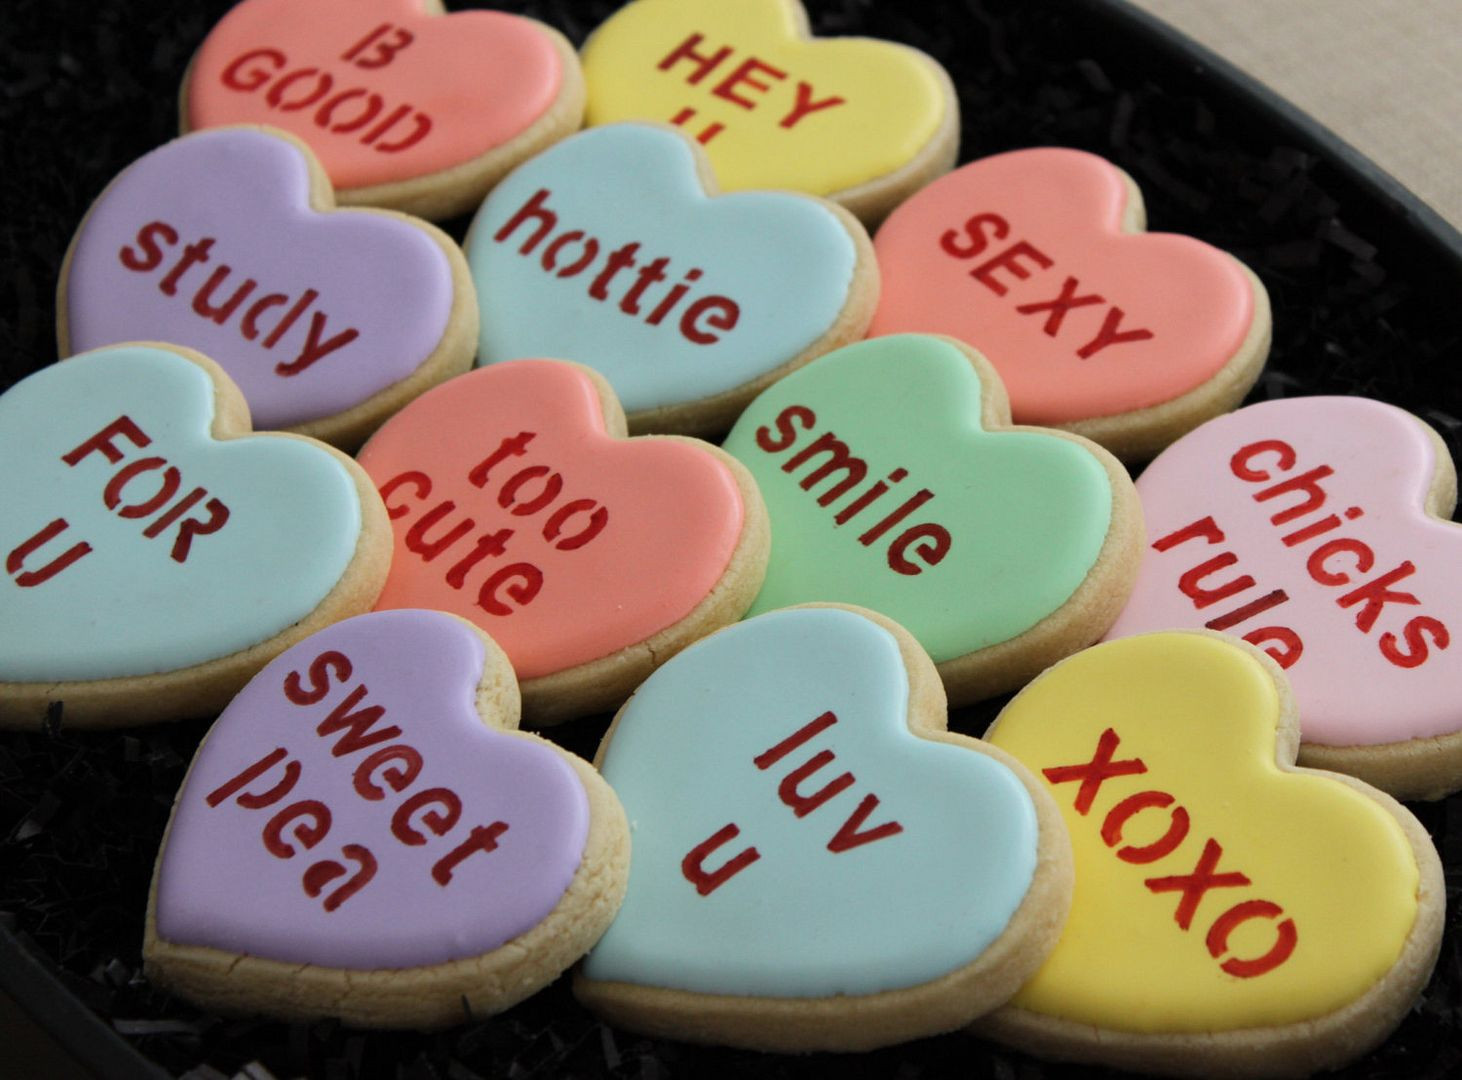 Valentines Day Cookies Delivery
 9 very creative Valentines cookies beyond frosted hearts